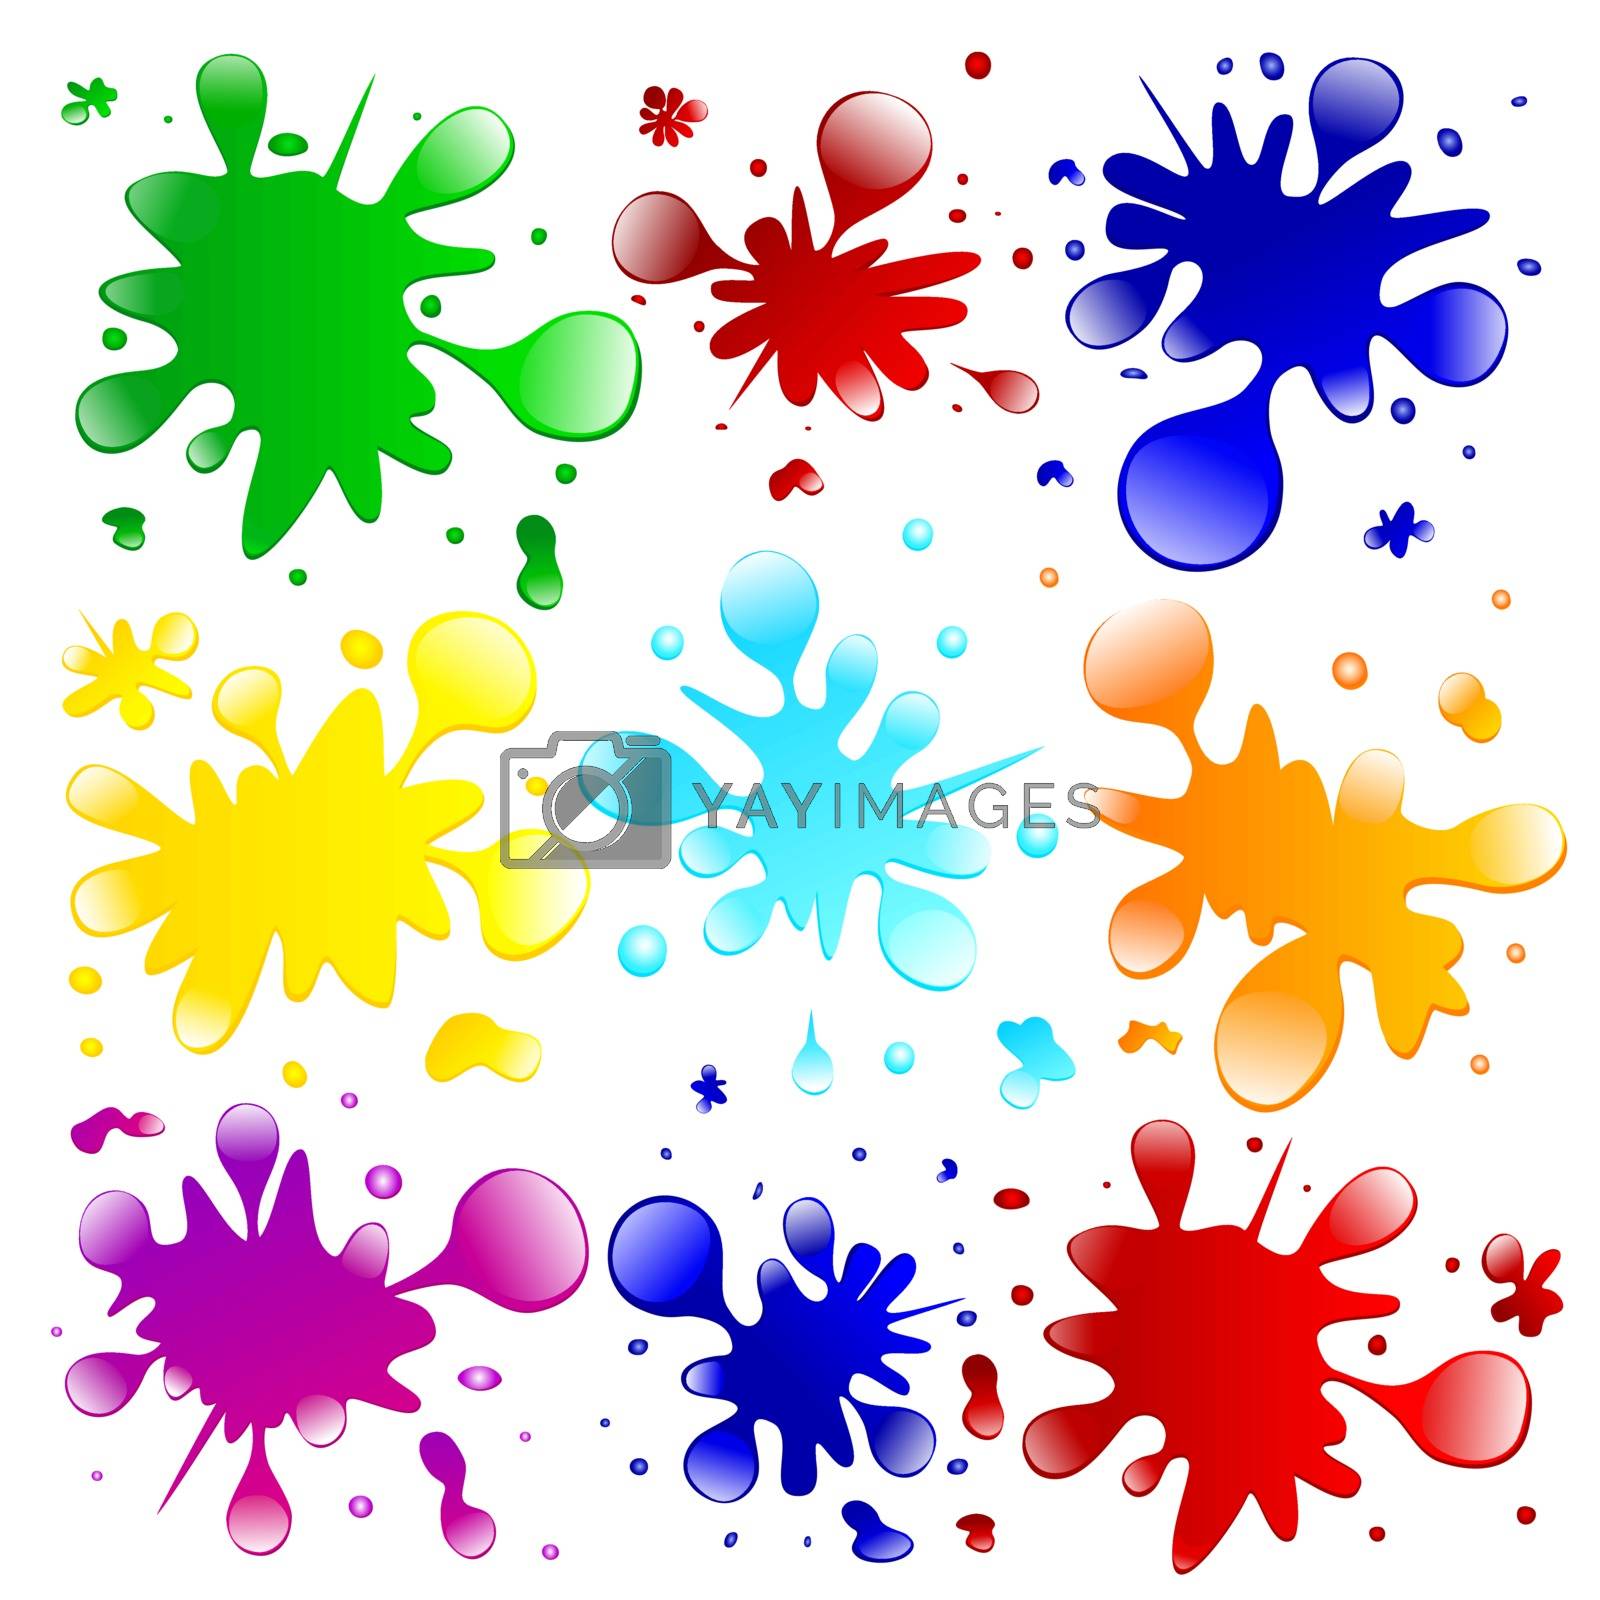 Royalty free image of Colorful paint splatters by liolle